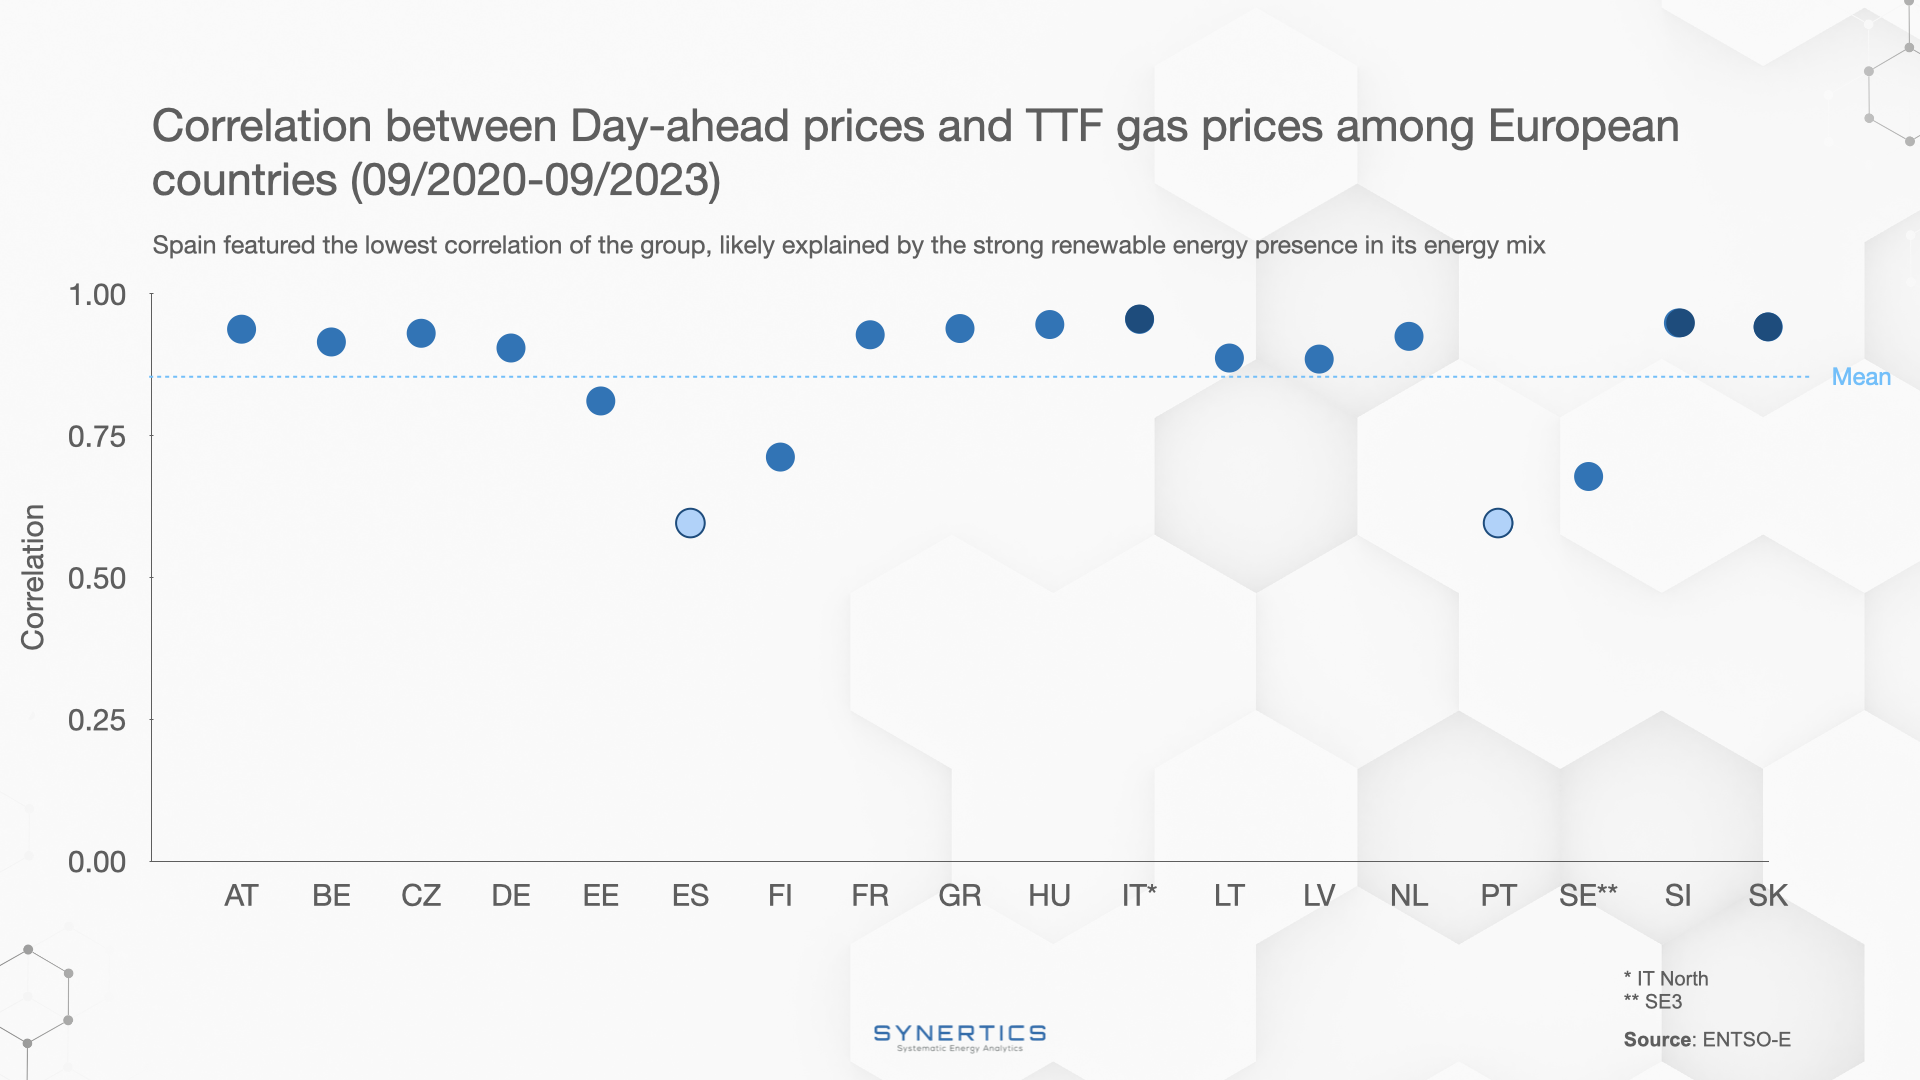 Correlation between day-ahead prices and natural gas prices in European countries